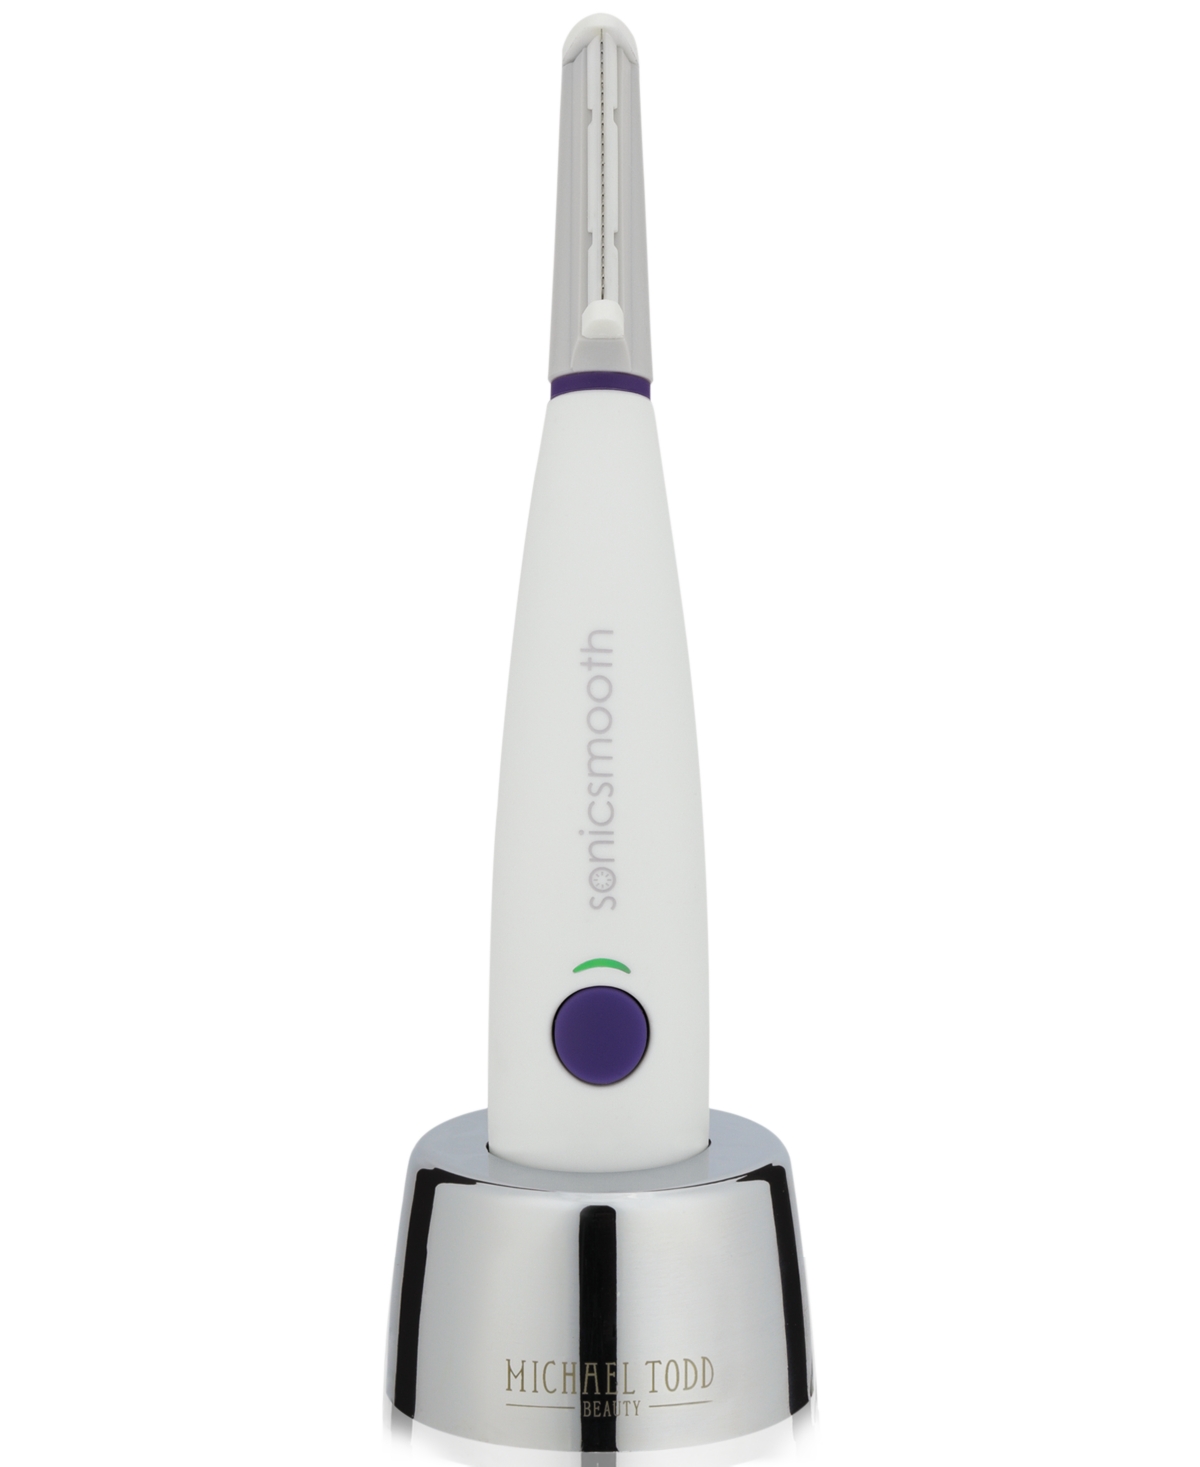 Michael Todd Beauty Sonicsmooth Sonic Dermaplaning Tool - 3 in 1 Facial Exfoliation & Peach Fuzz Hair Removal System